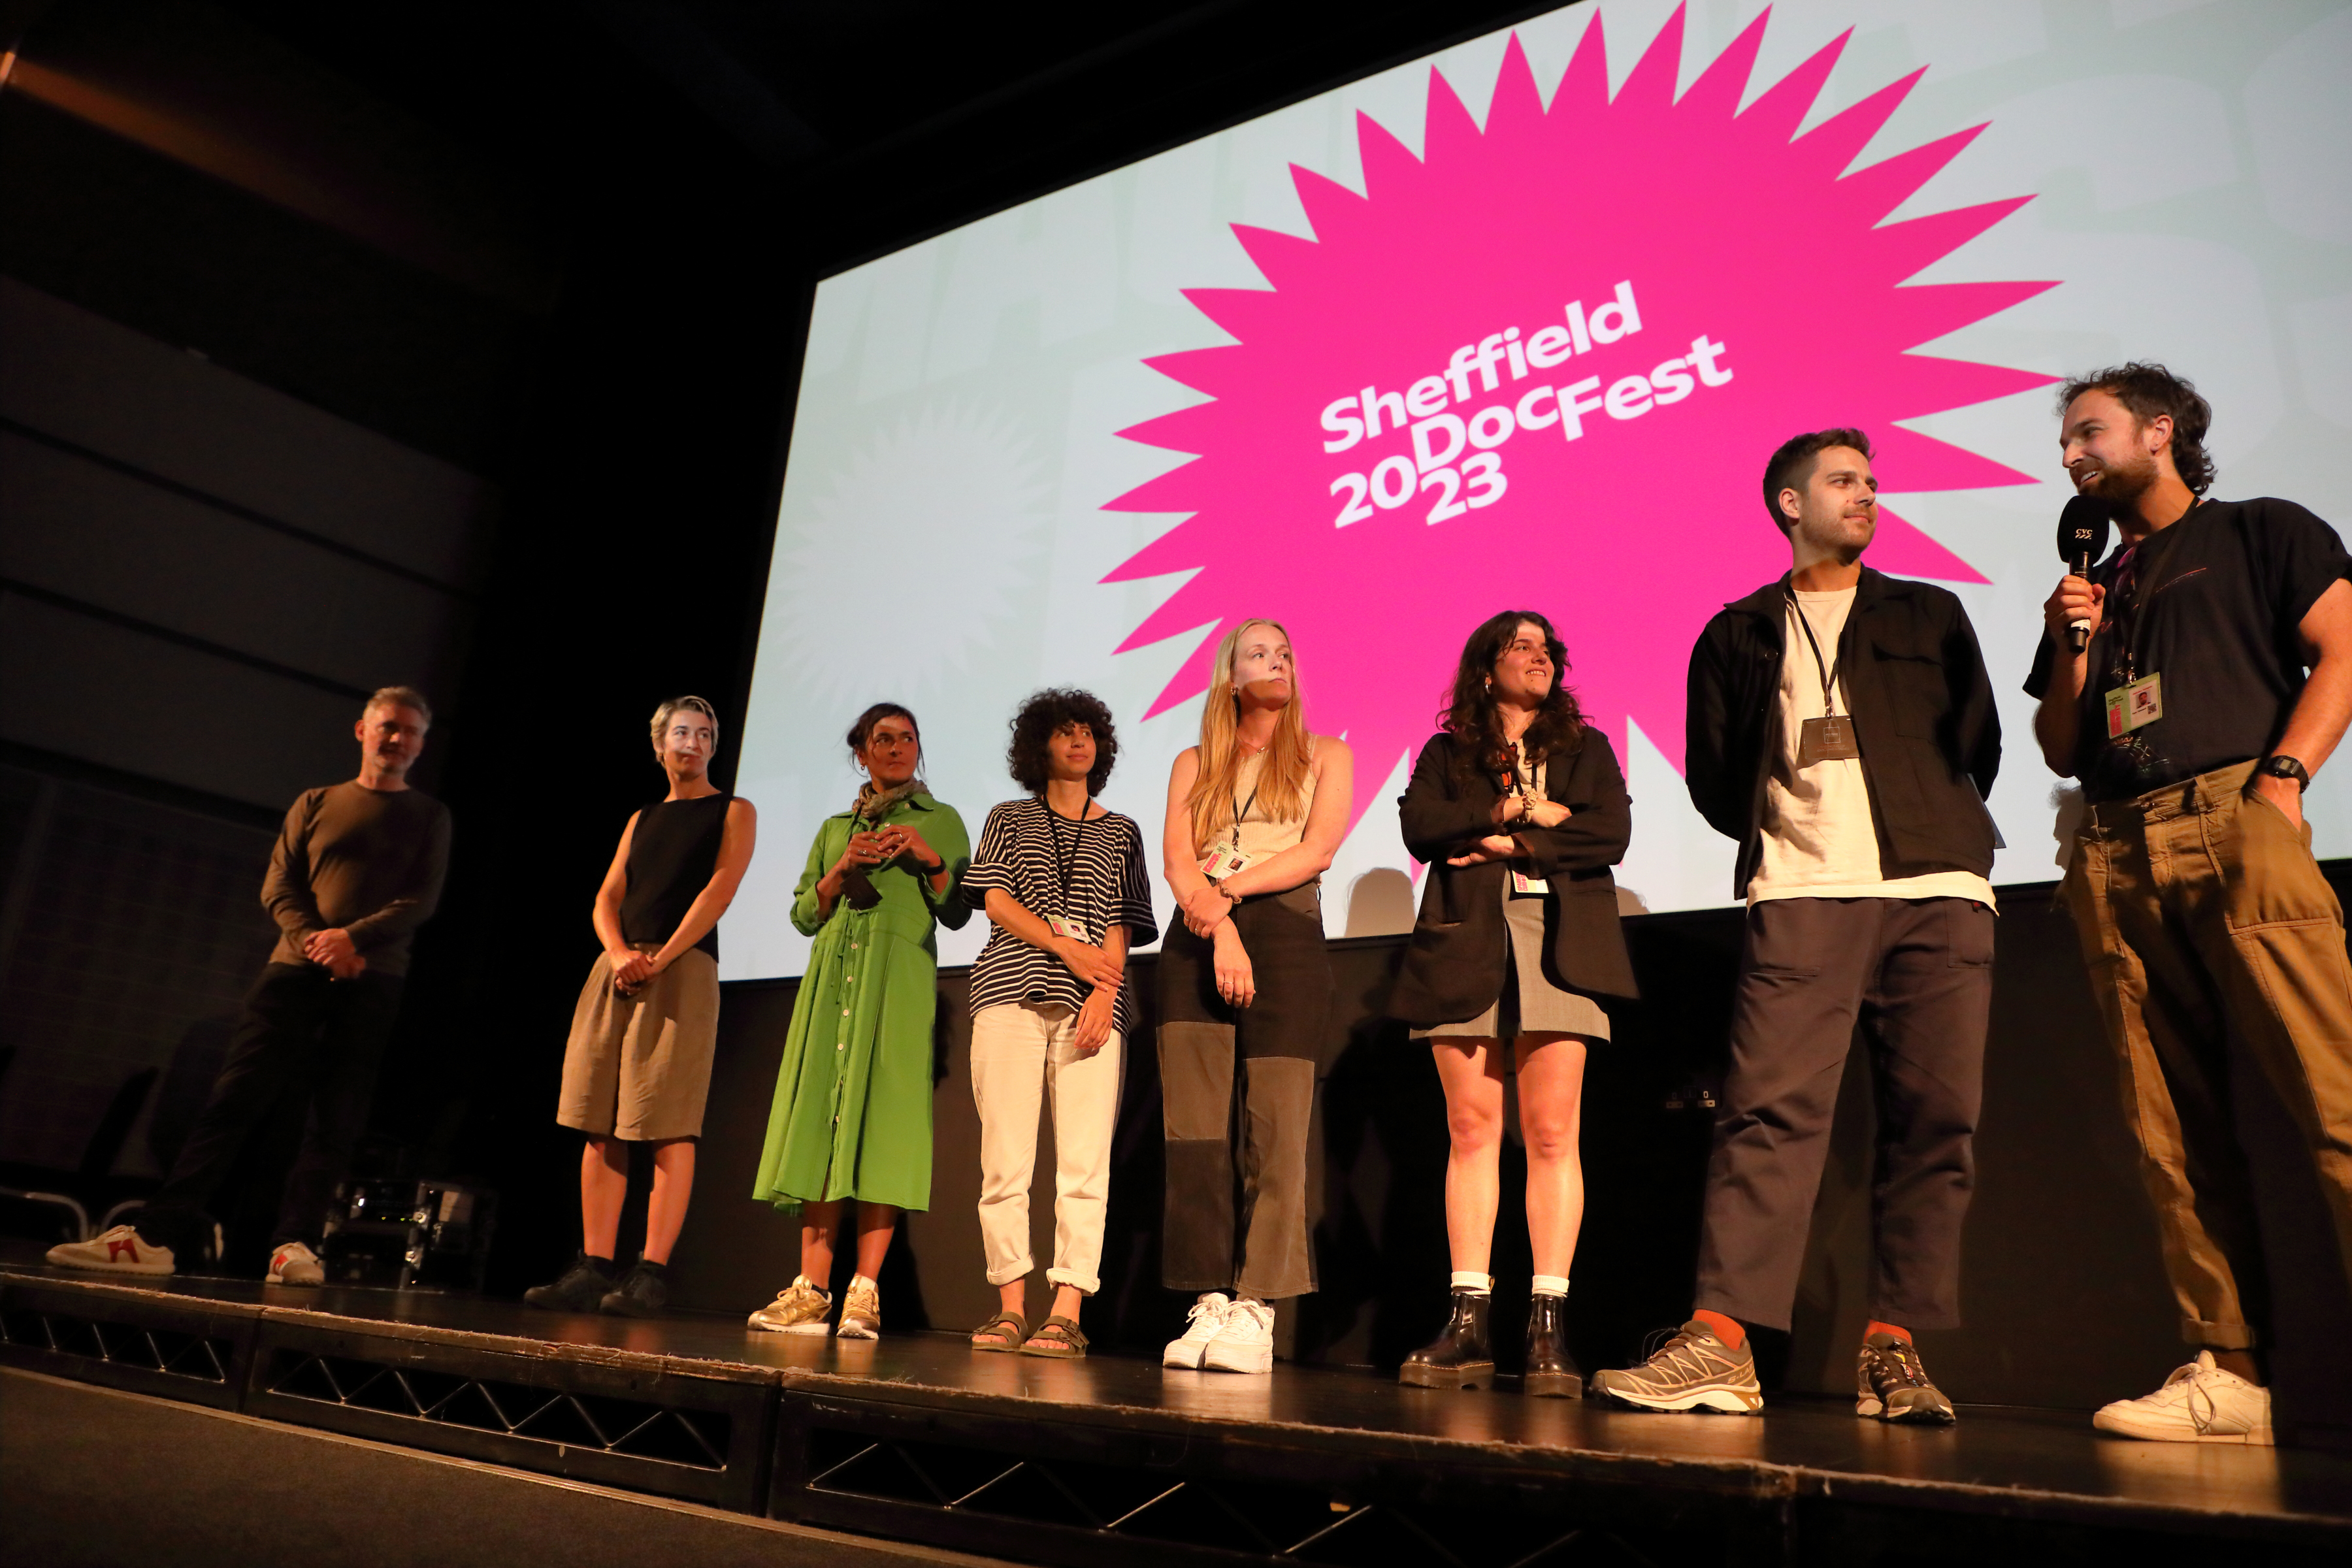 A group of people stand on a stage looking to the person on the far right who is holding a microphone. Behind them, a screen shows the words 'Sheffield DocFest 2023' 